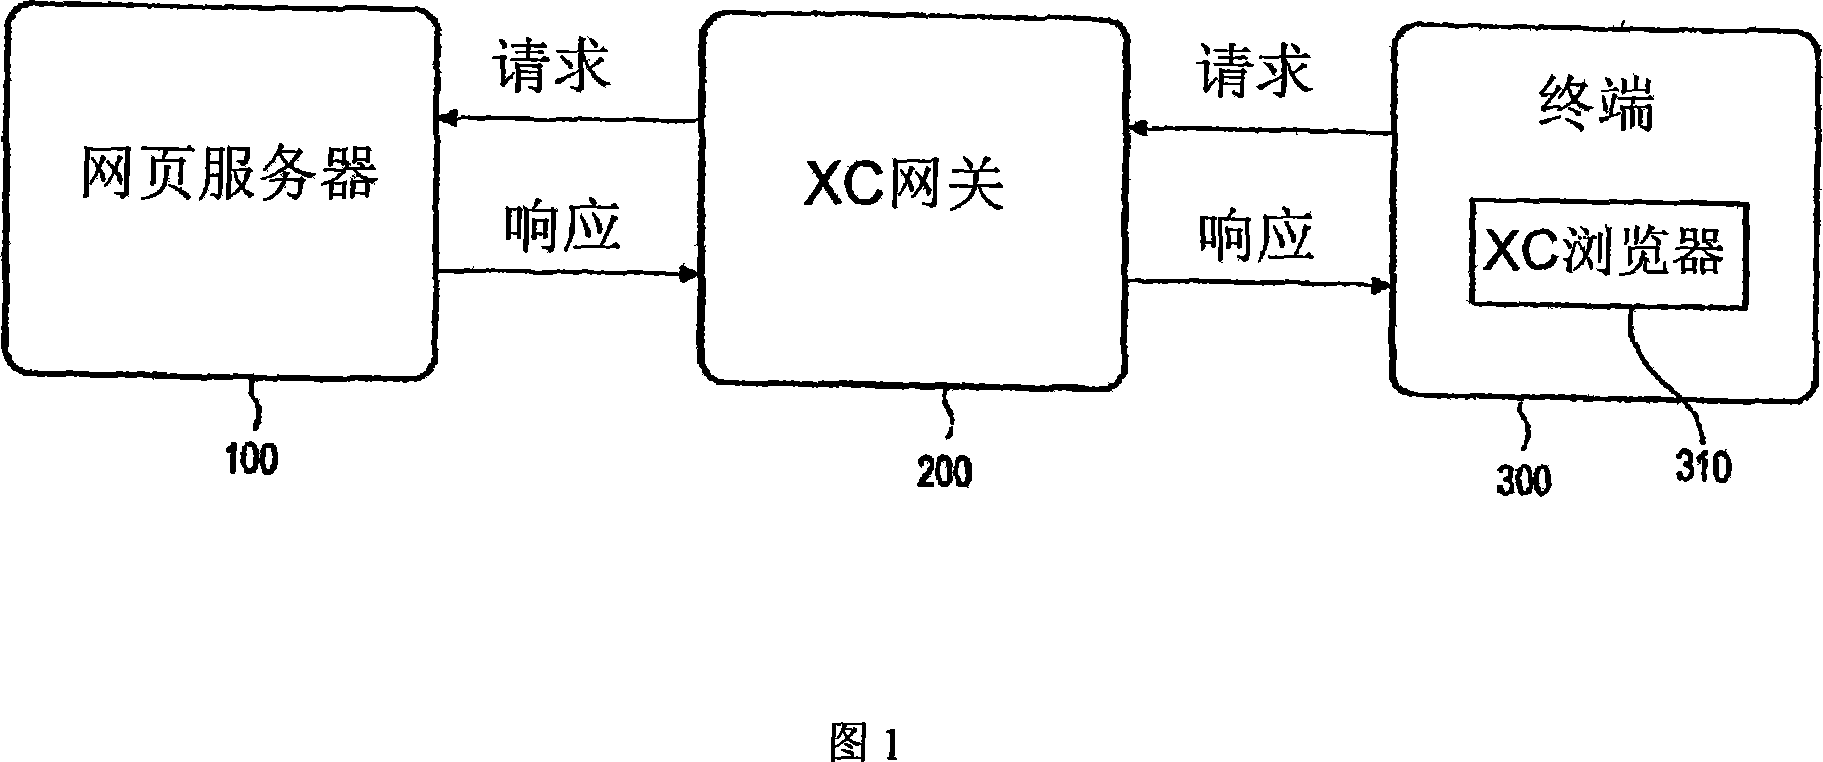 System and method for providing and handling executable web content